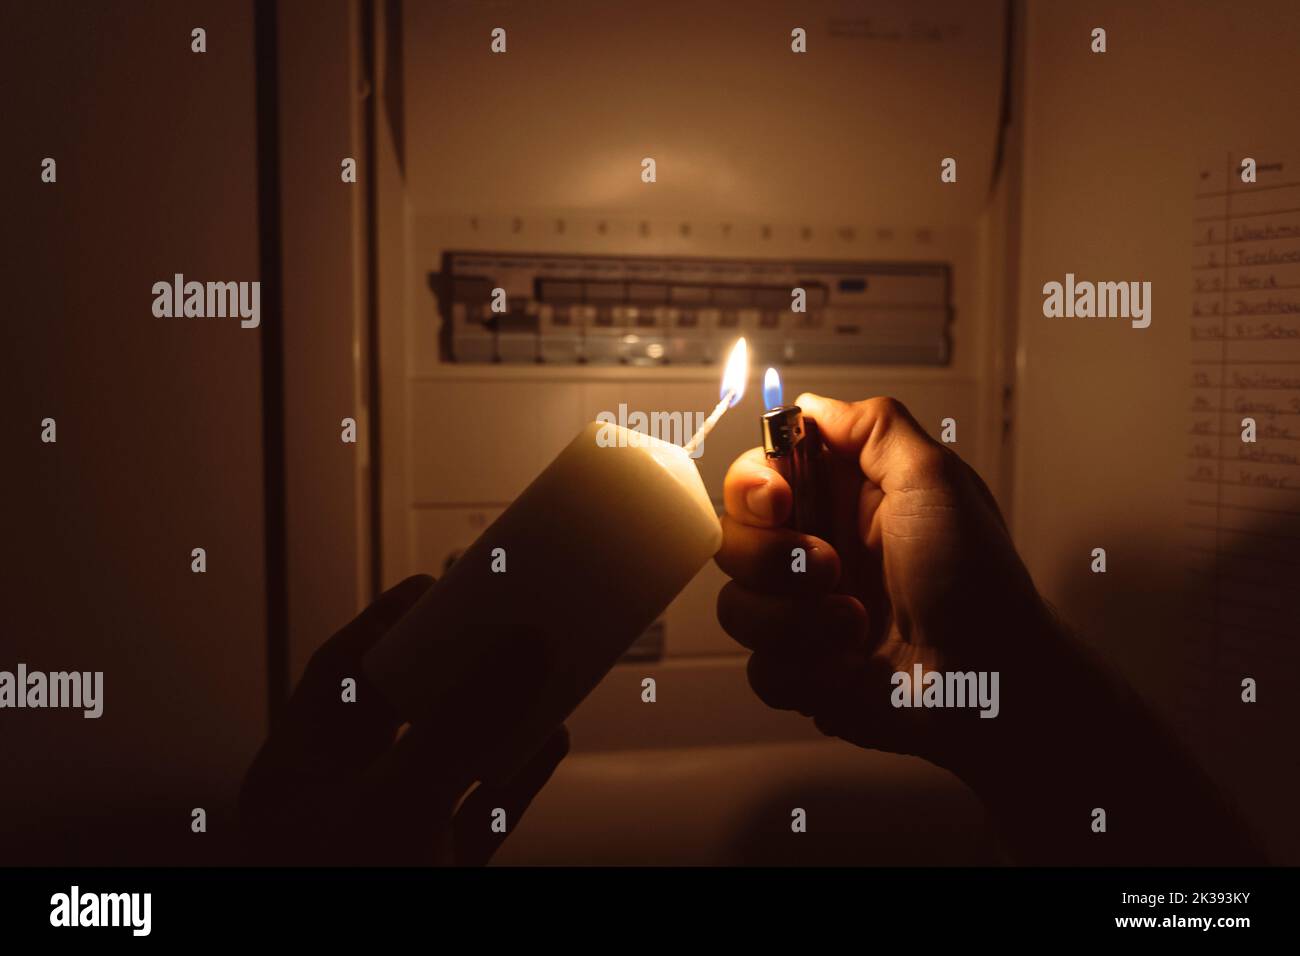 Power Failure In The Apartment, Man Shines Candlelight And Checks The Fuse Box. Electricity, Power Failure, Blackout Concept Stock Photo